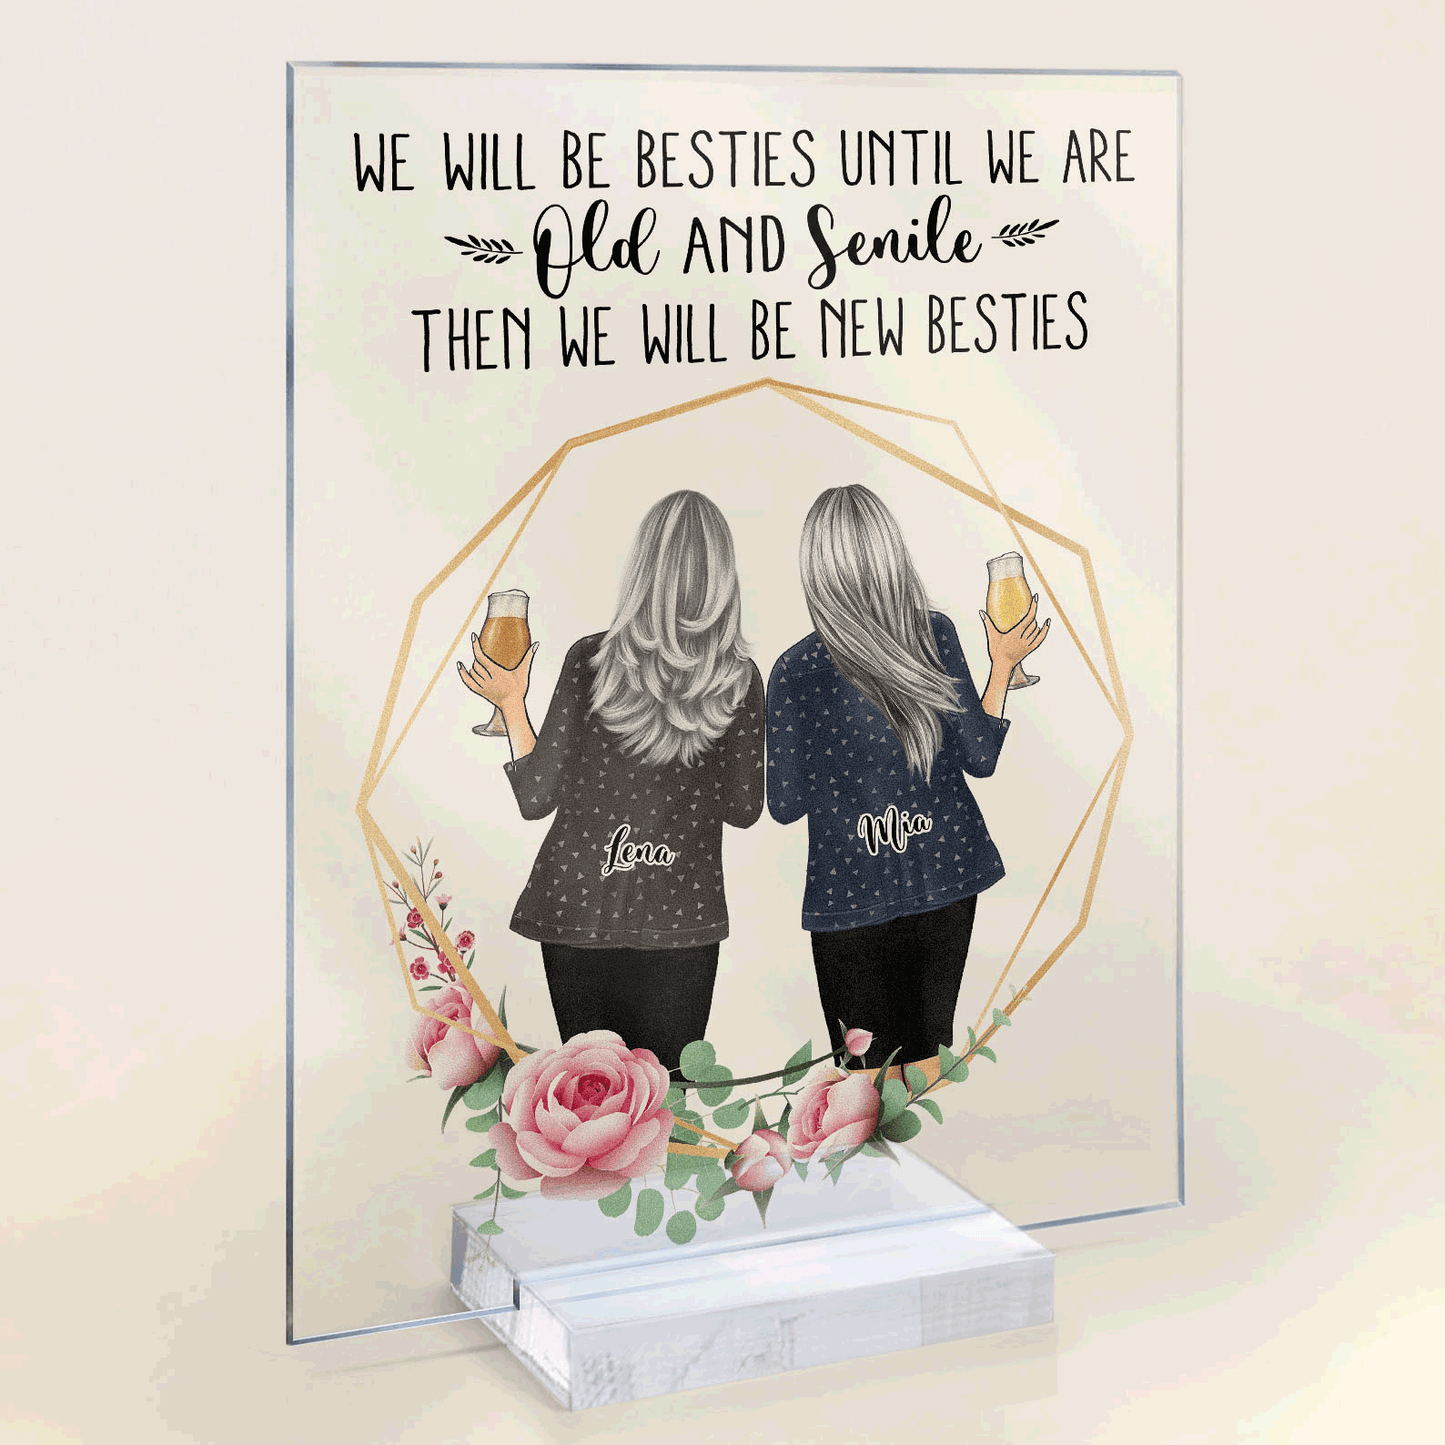 Besties Til' Old And Senile - Personalized Acrylic Plaque - Birthday Gift For Besties, Bff, Soul Sisters, Old Friends